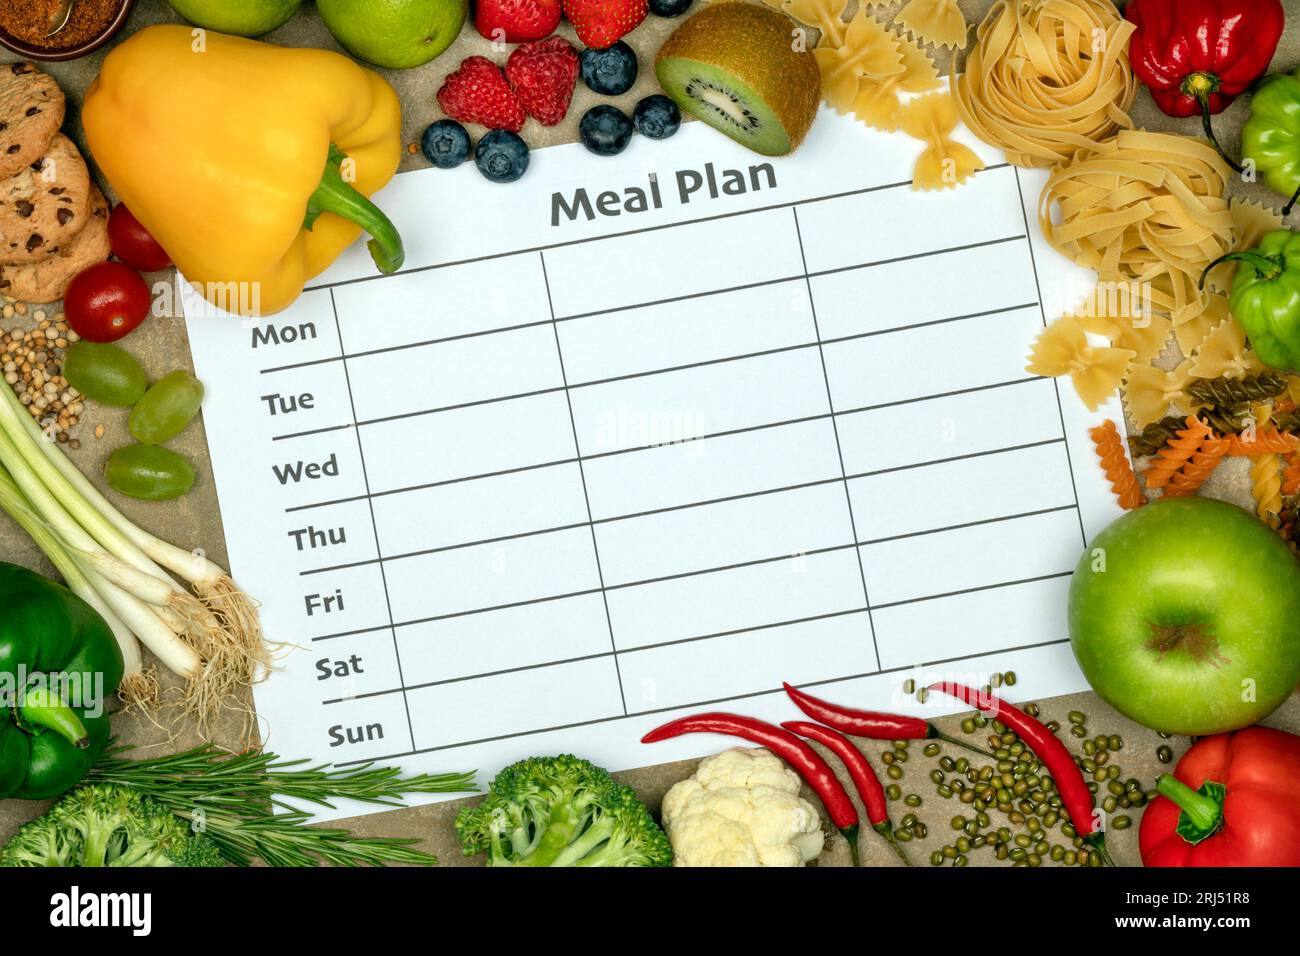 Menu for the week - Meal Plan with a border of food Stock Photo